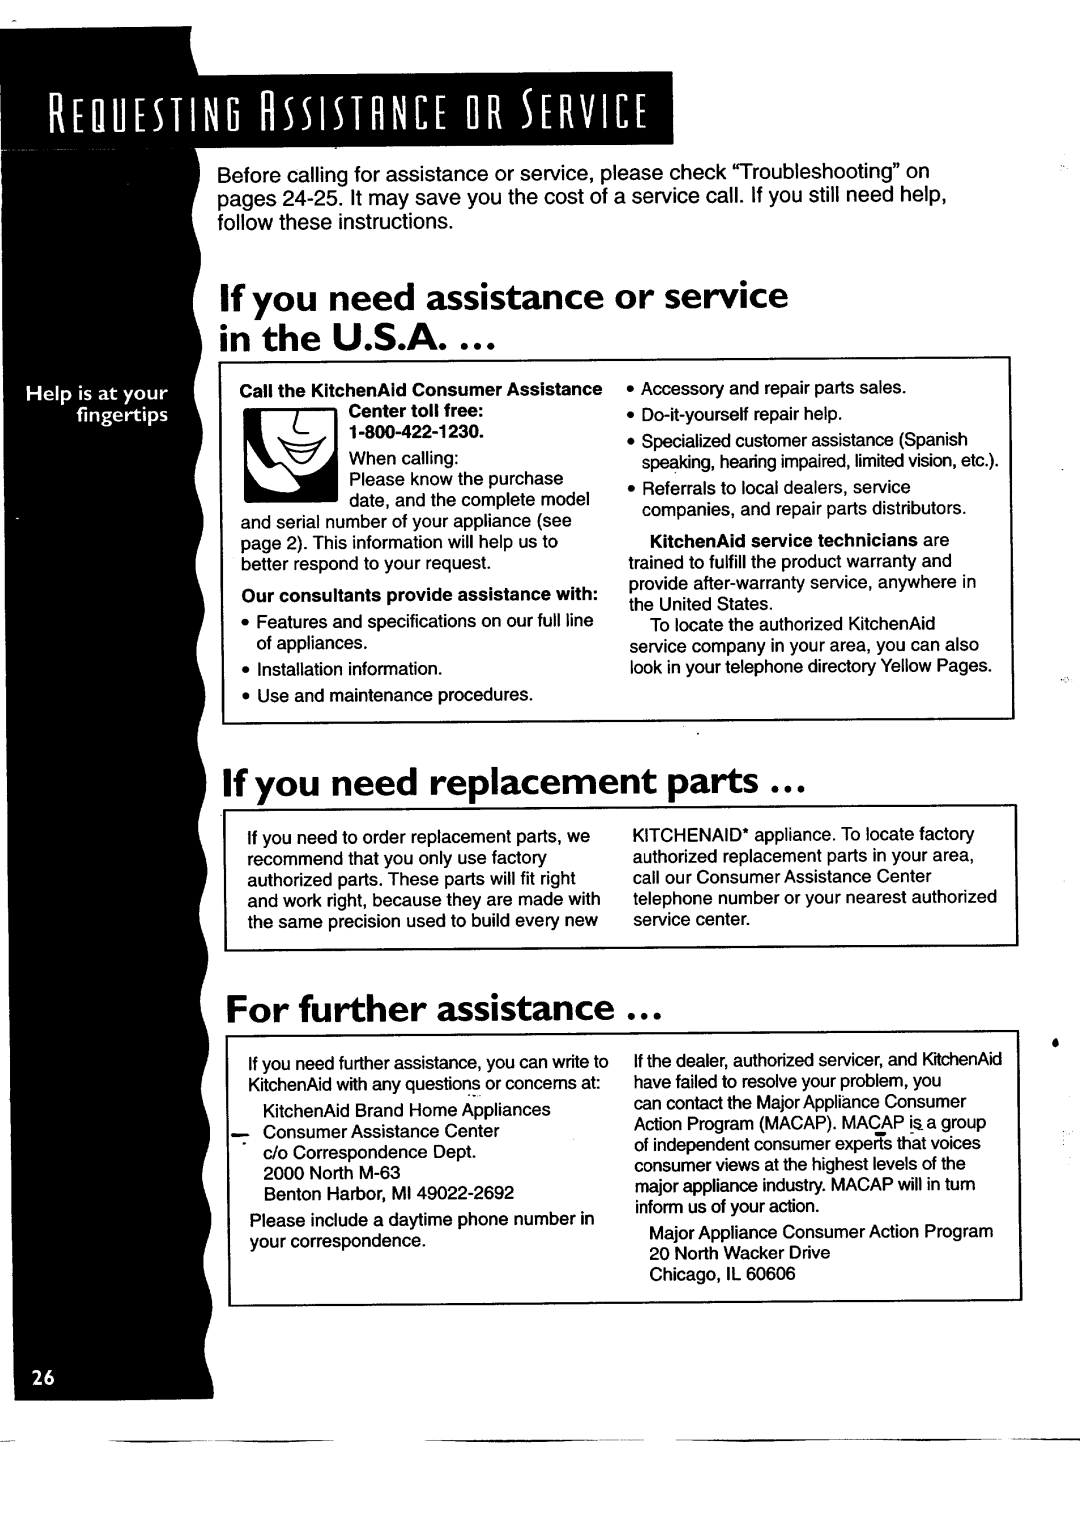 KitchenAid KUDH24SE If you need assistance or service in the U.S.A, If you need replacement, parts, For further assistance 